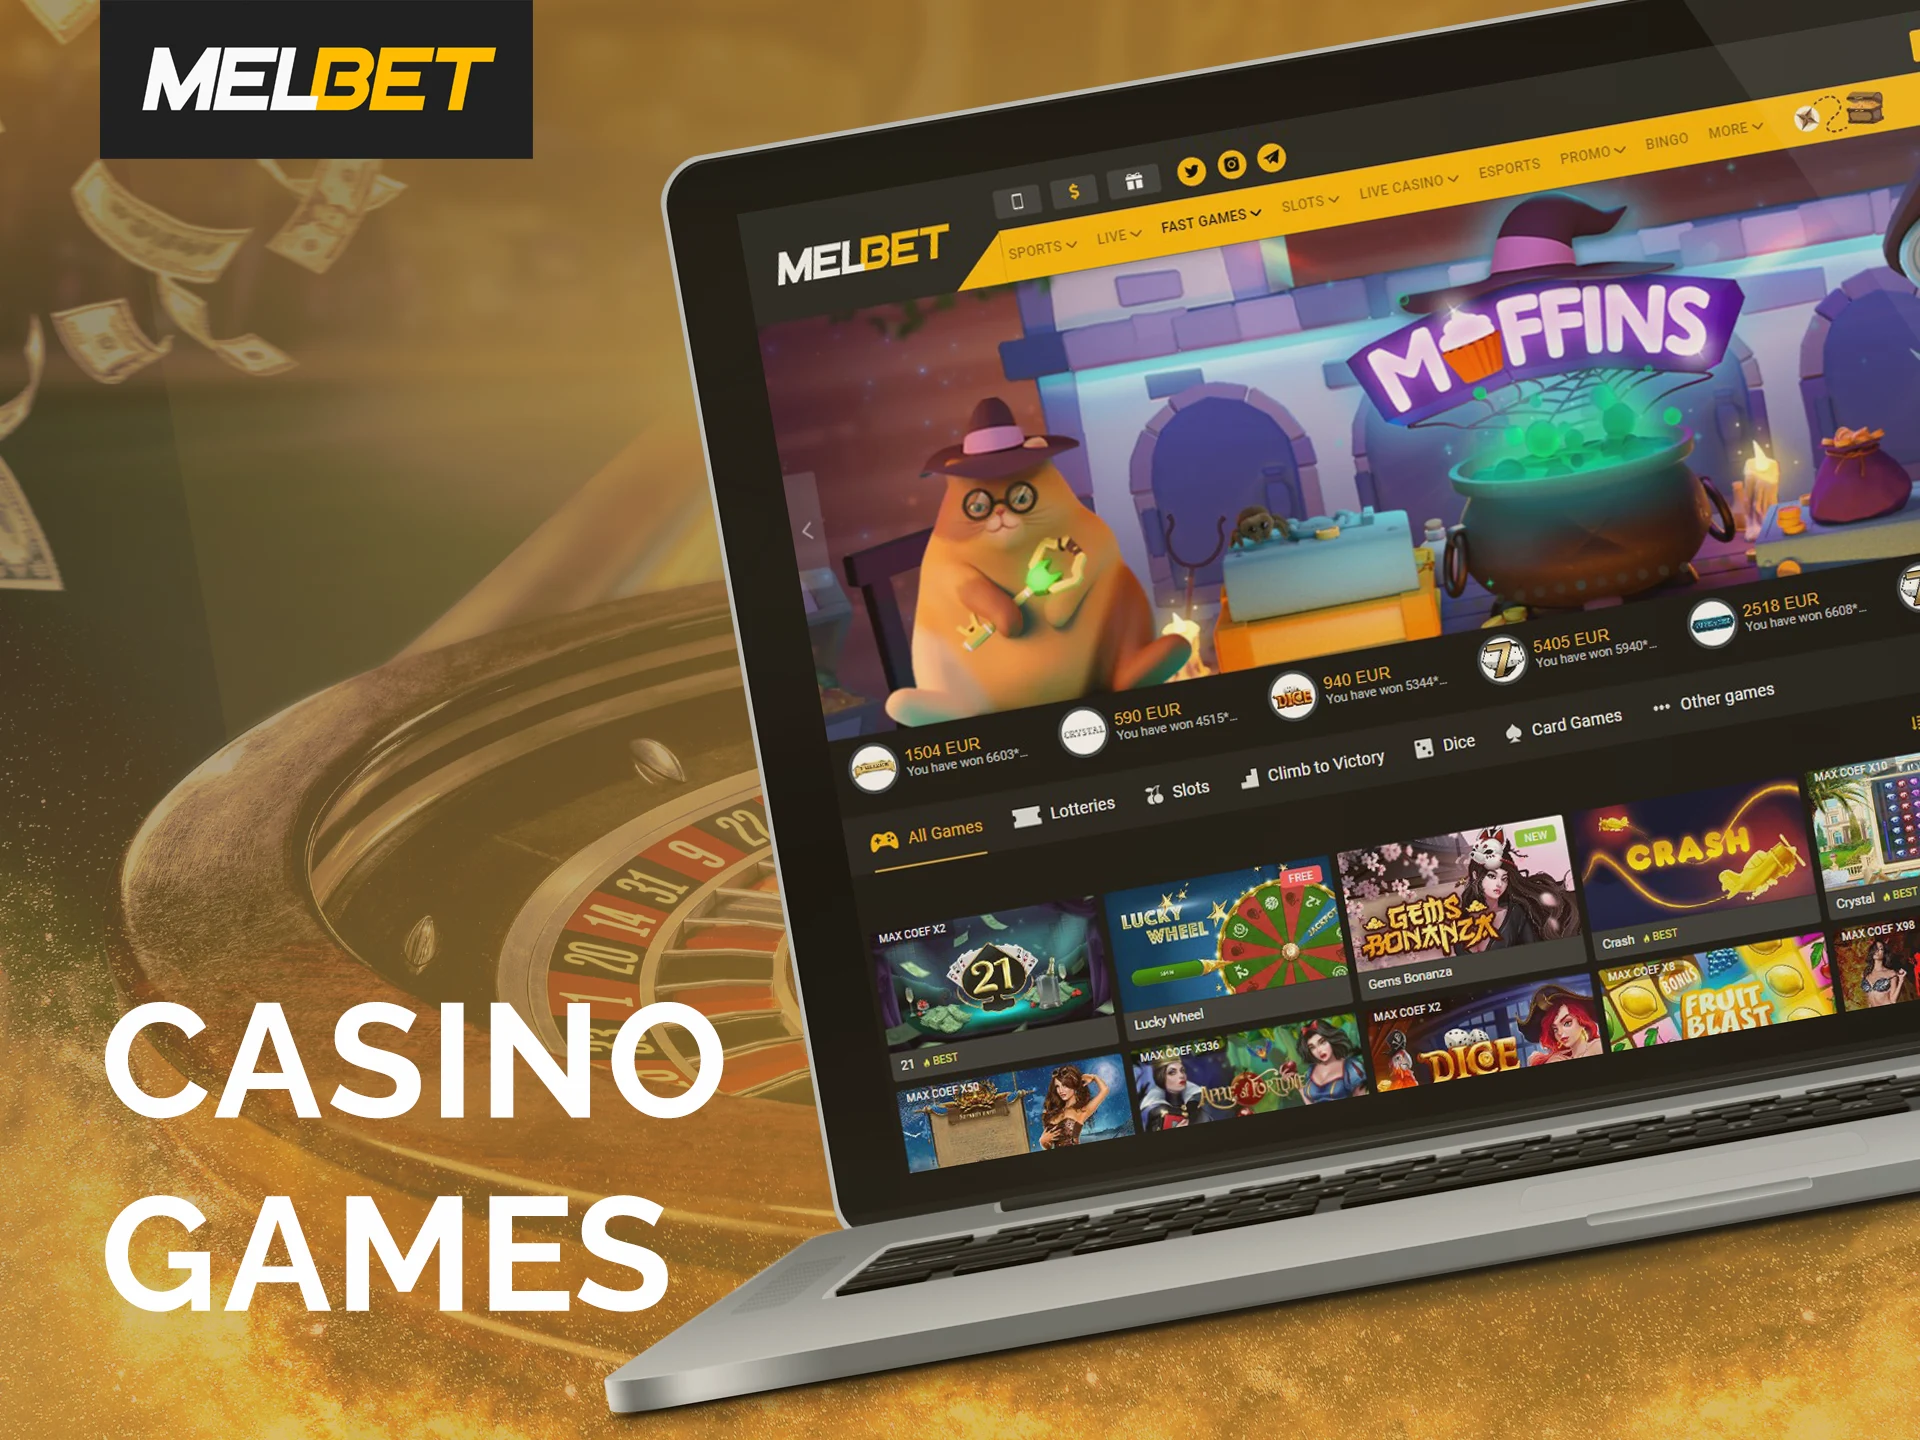 Melbet online casino features a vast gaming library.